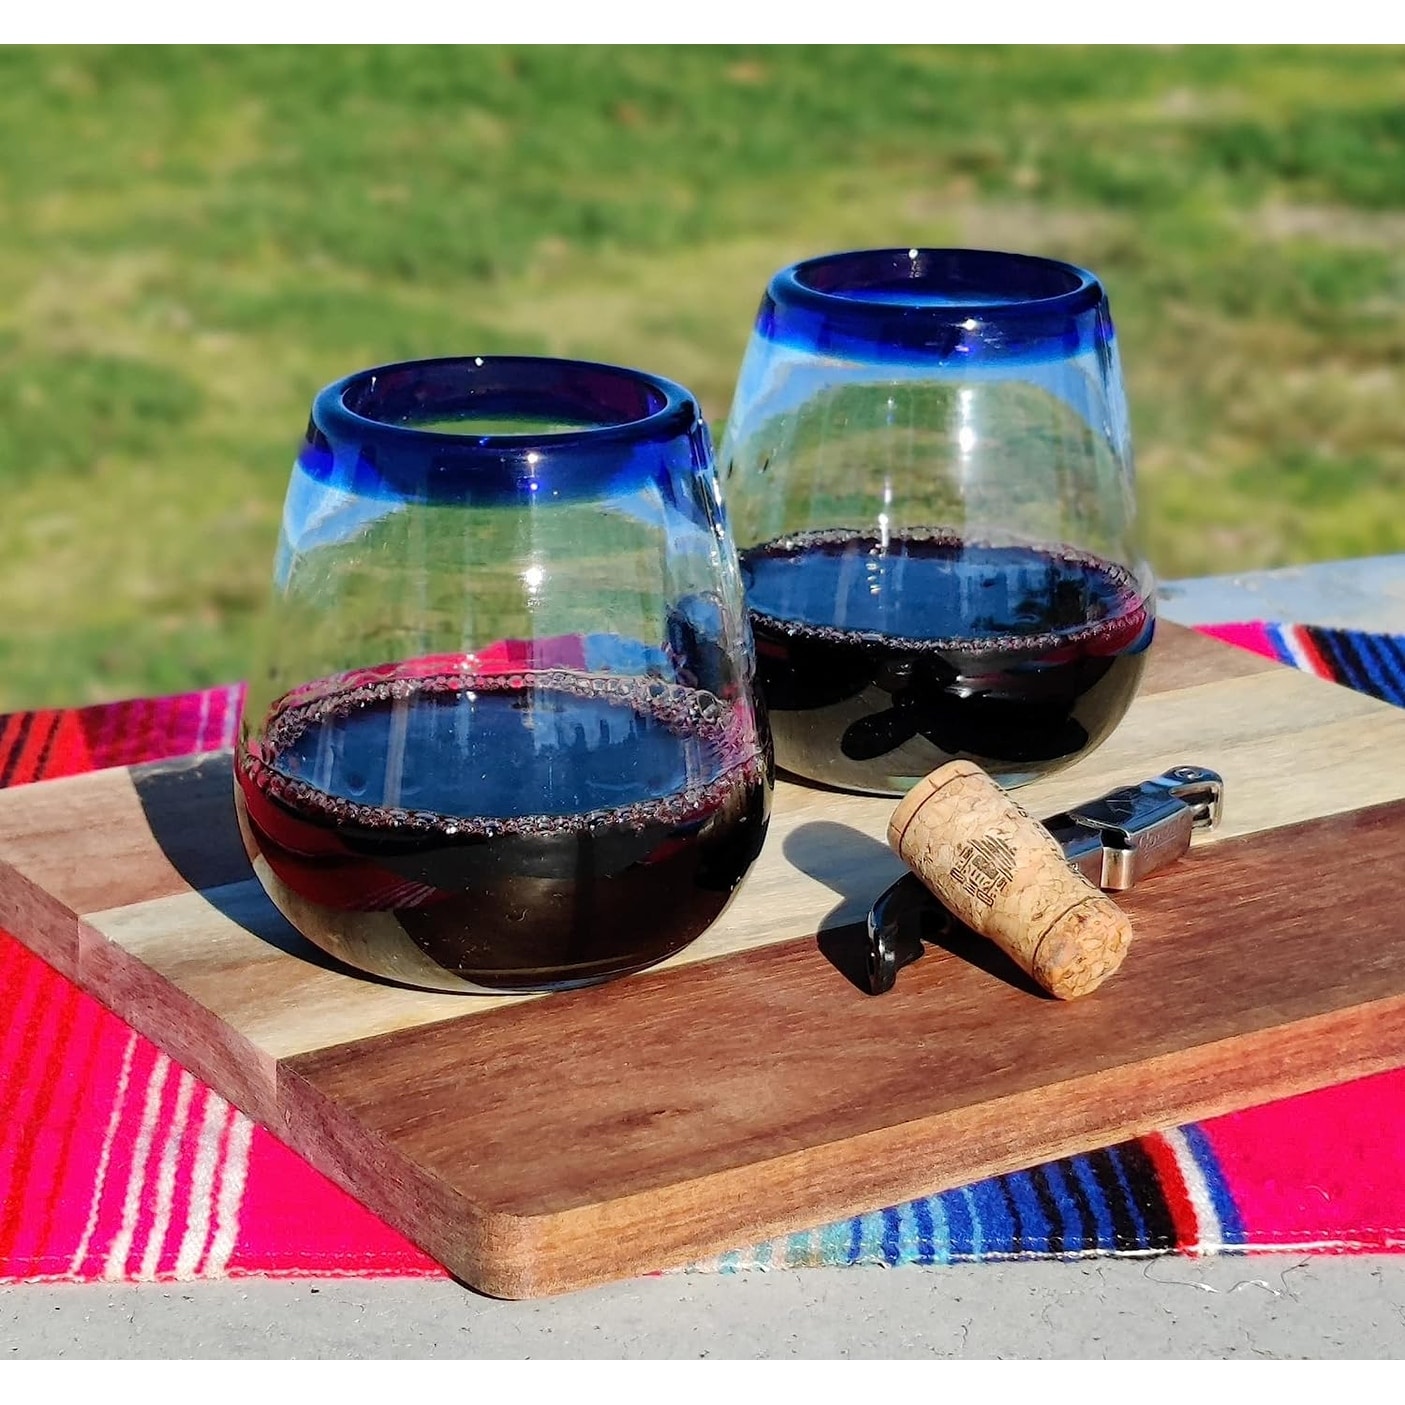 https://ak1.ostkcdn.com/images/products/is/images/direct/f335531759c210491ded7492d8364ceb9e72971e/Hand-Blown-Mexican-Stemless-Wine-Glasses---Set-of-6-Glasses-with-Cobalt-Blue-Rims-%2815-oz%29.jpg